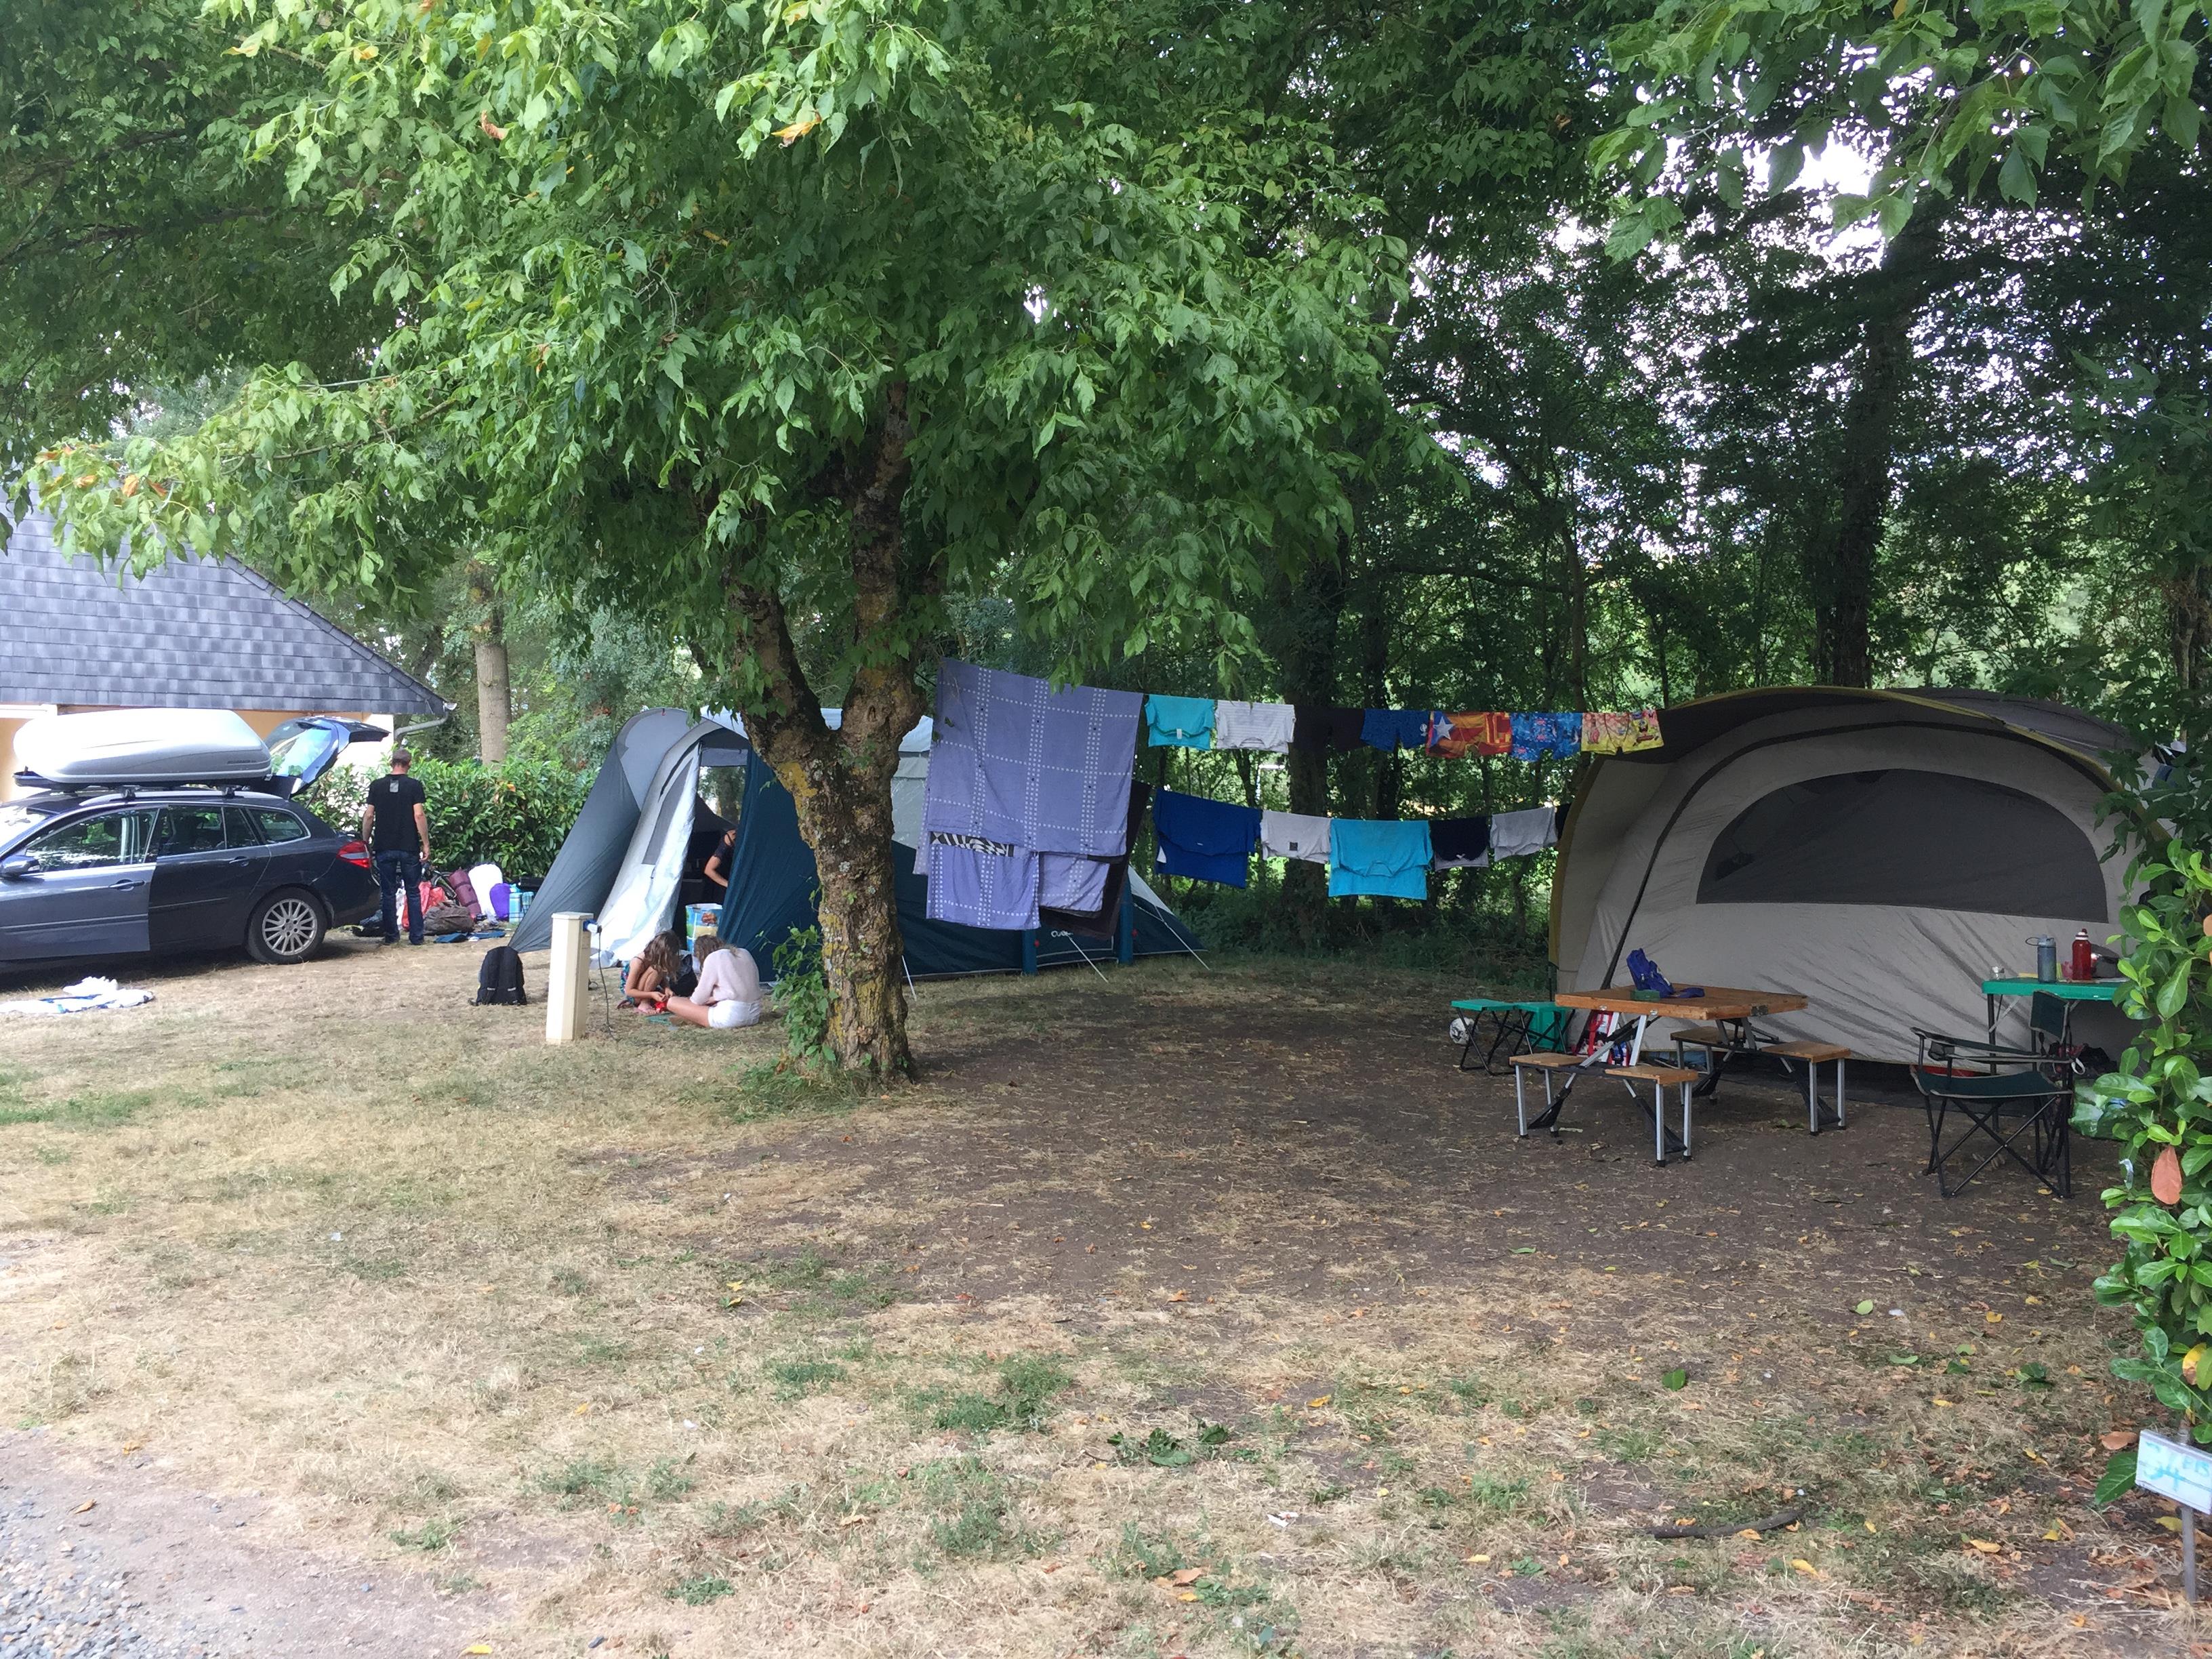 Emplacement - Forfait Nature (1 Emplacement, 1 Voiture) - Camping Les Granges, Luynes